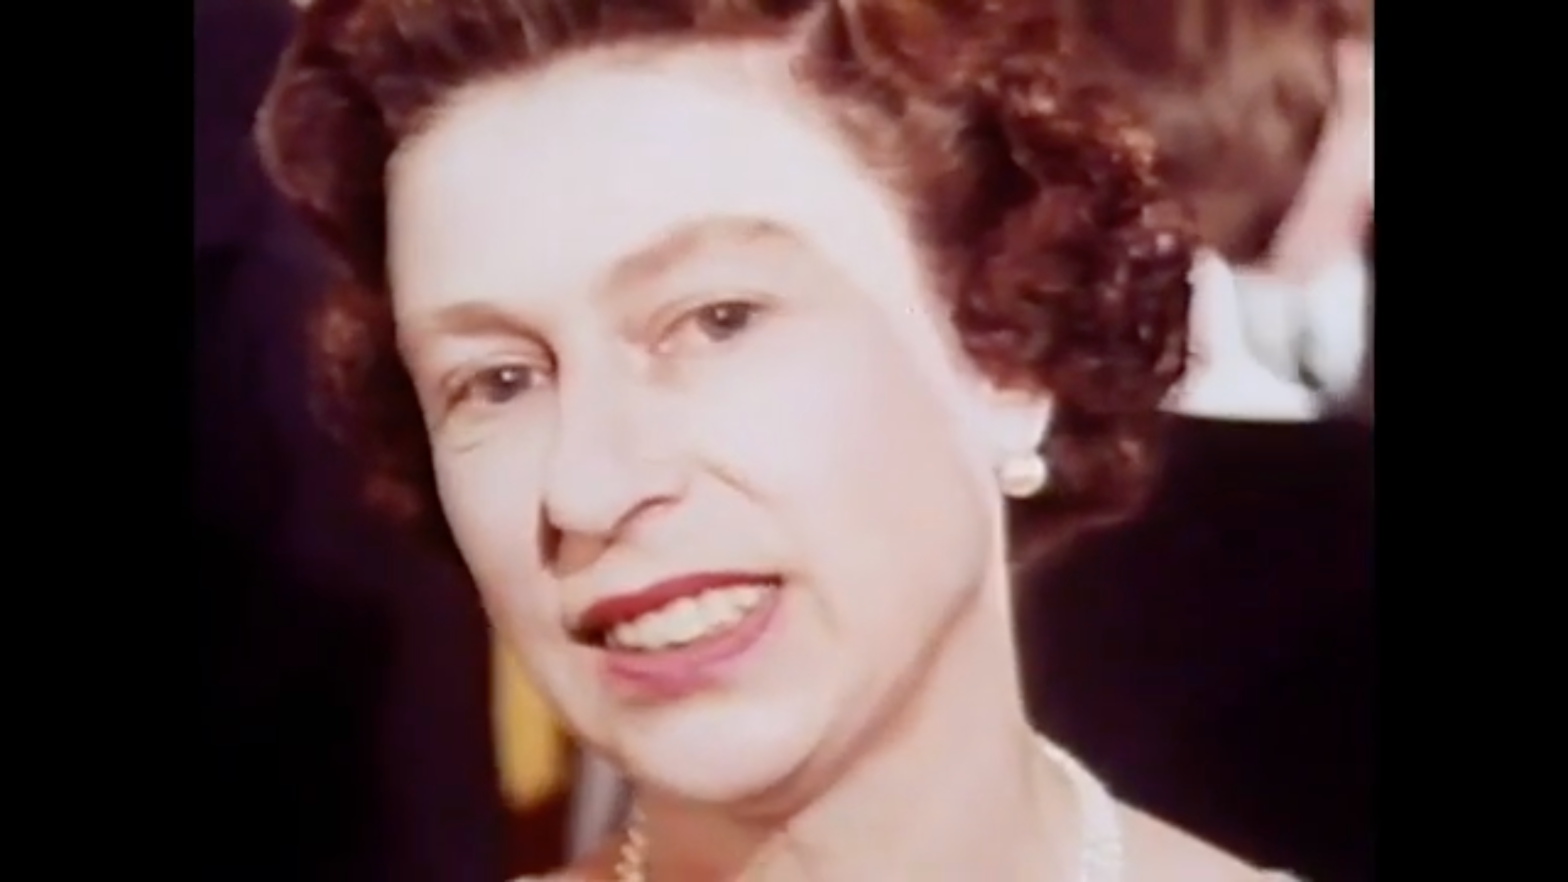 Screenshot from the long-banned 1969 BBC documentary 'Royal Family' which has resurfaced on YouTube (Screenshot: BBC/YouTube)